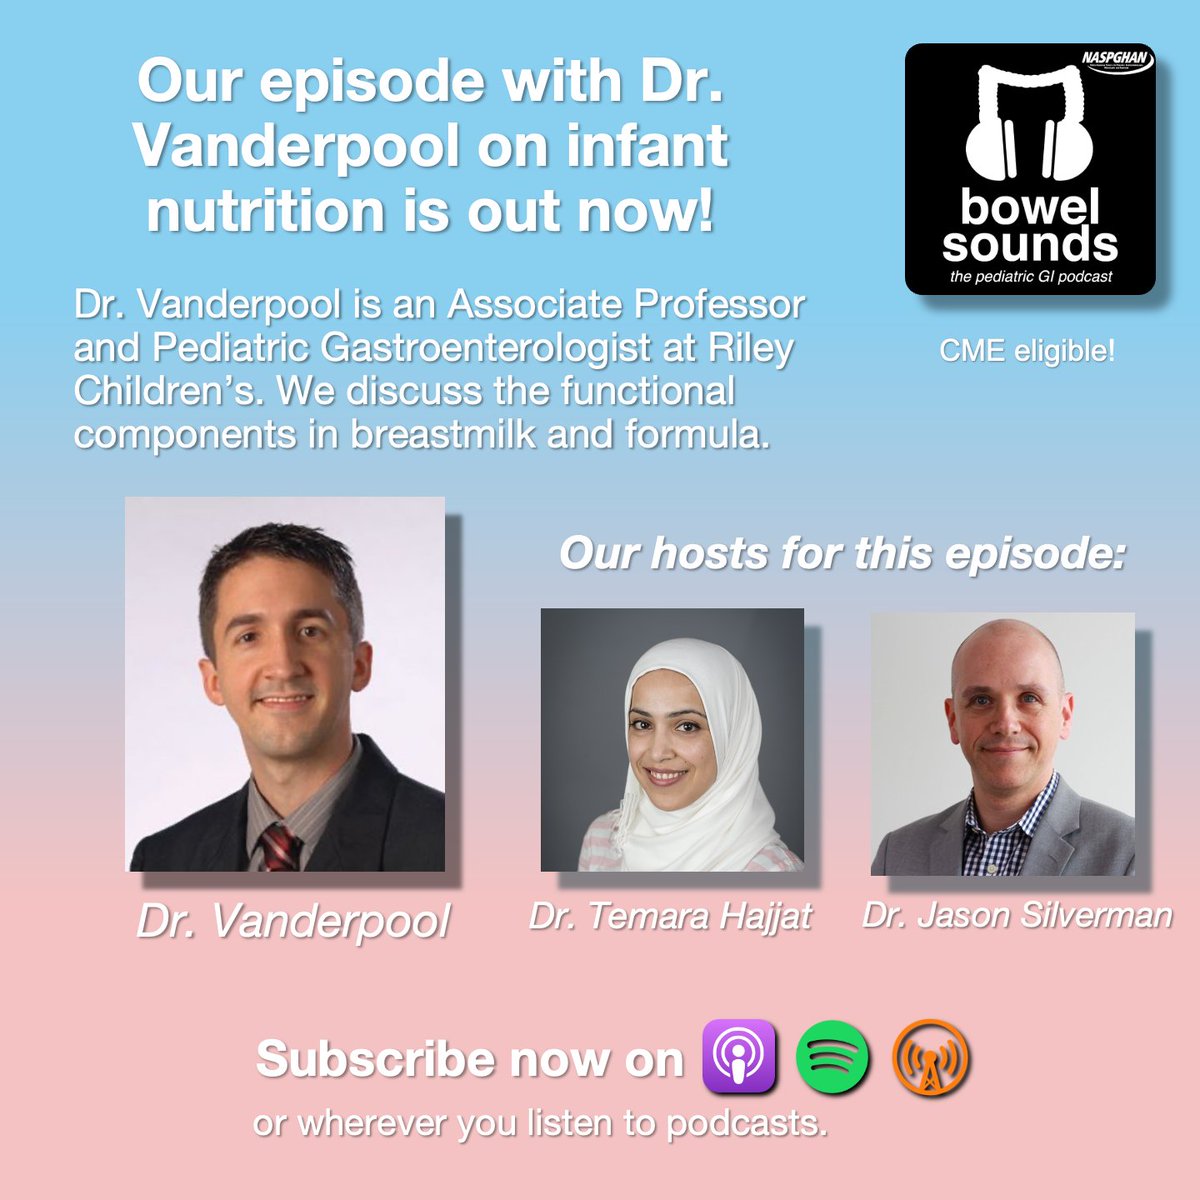 Our new #podcast episode w Dr. Vanderpool on #infant #nutrition is out now! 🍼 We discuss functional components of breastmilk and formula and how they help infants grow and thrive. @temarahajjat @DrJSilverman @NASPGHAN @cpnp_naspghan Don't miss it! 🎧 buzzsprout.com/581062/13196302